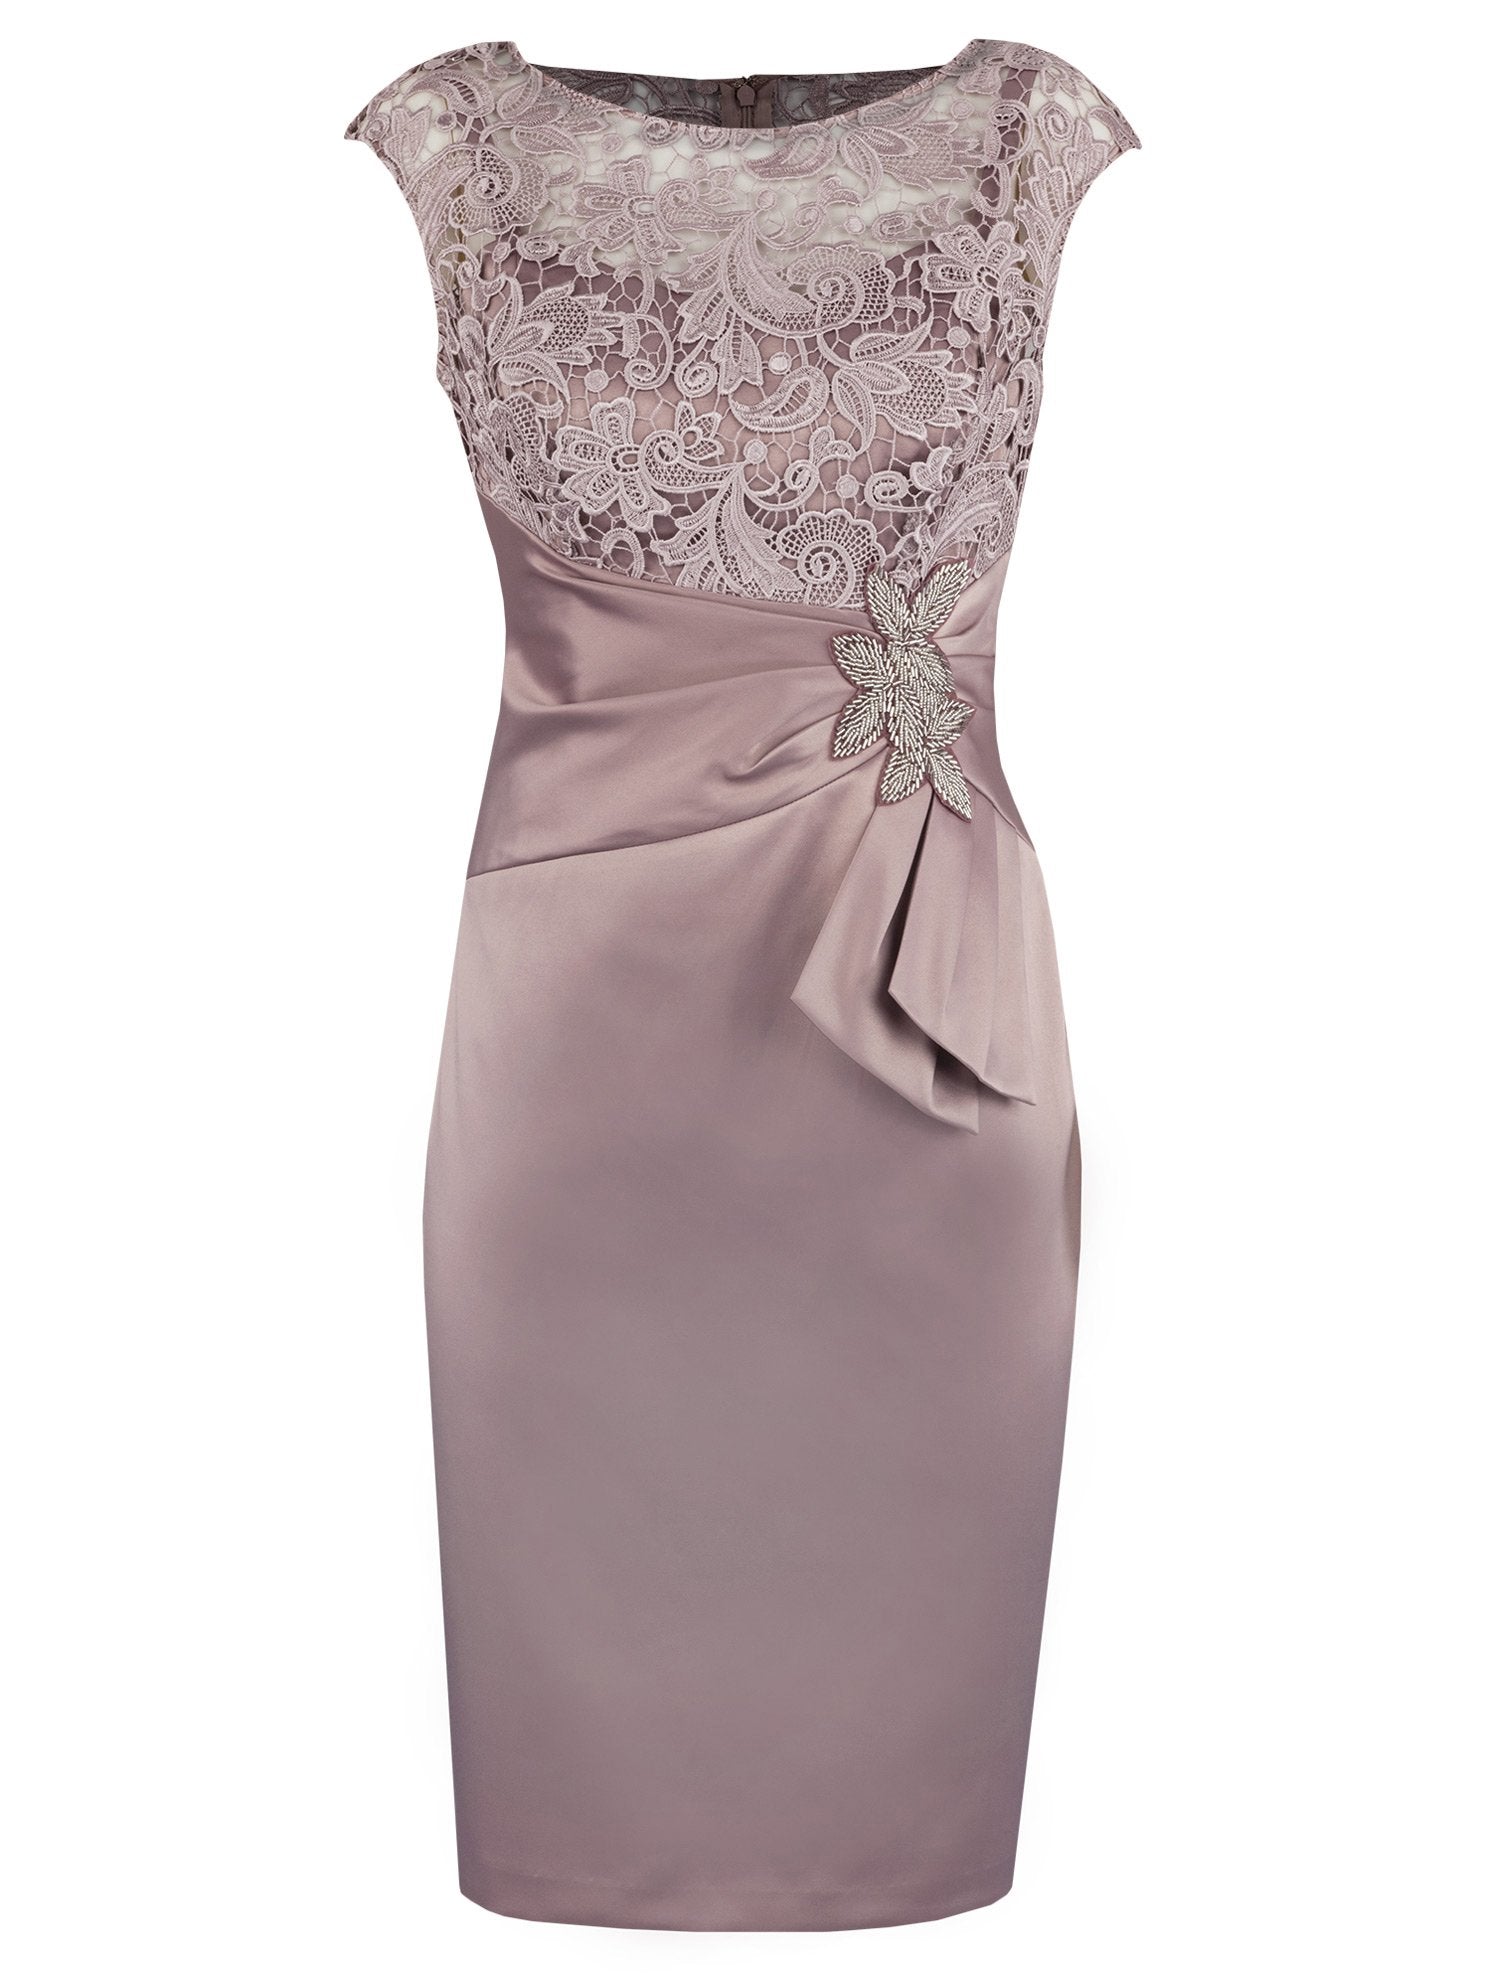 Sheath/Column Bateau Cap Sleeves Satin Knee Length Mother of the Bride Dresses with Beading Lace